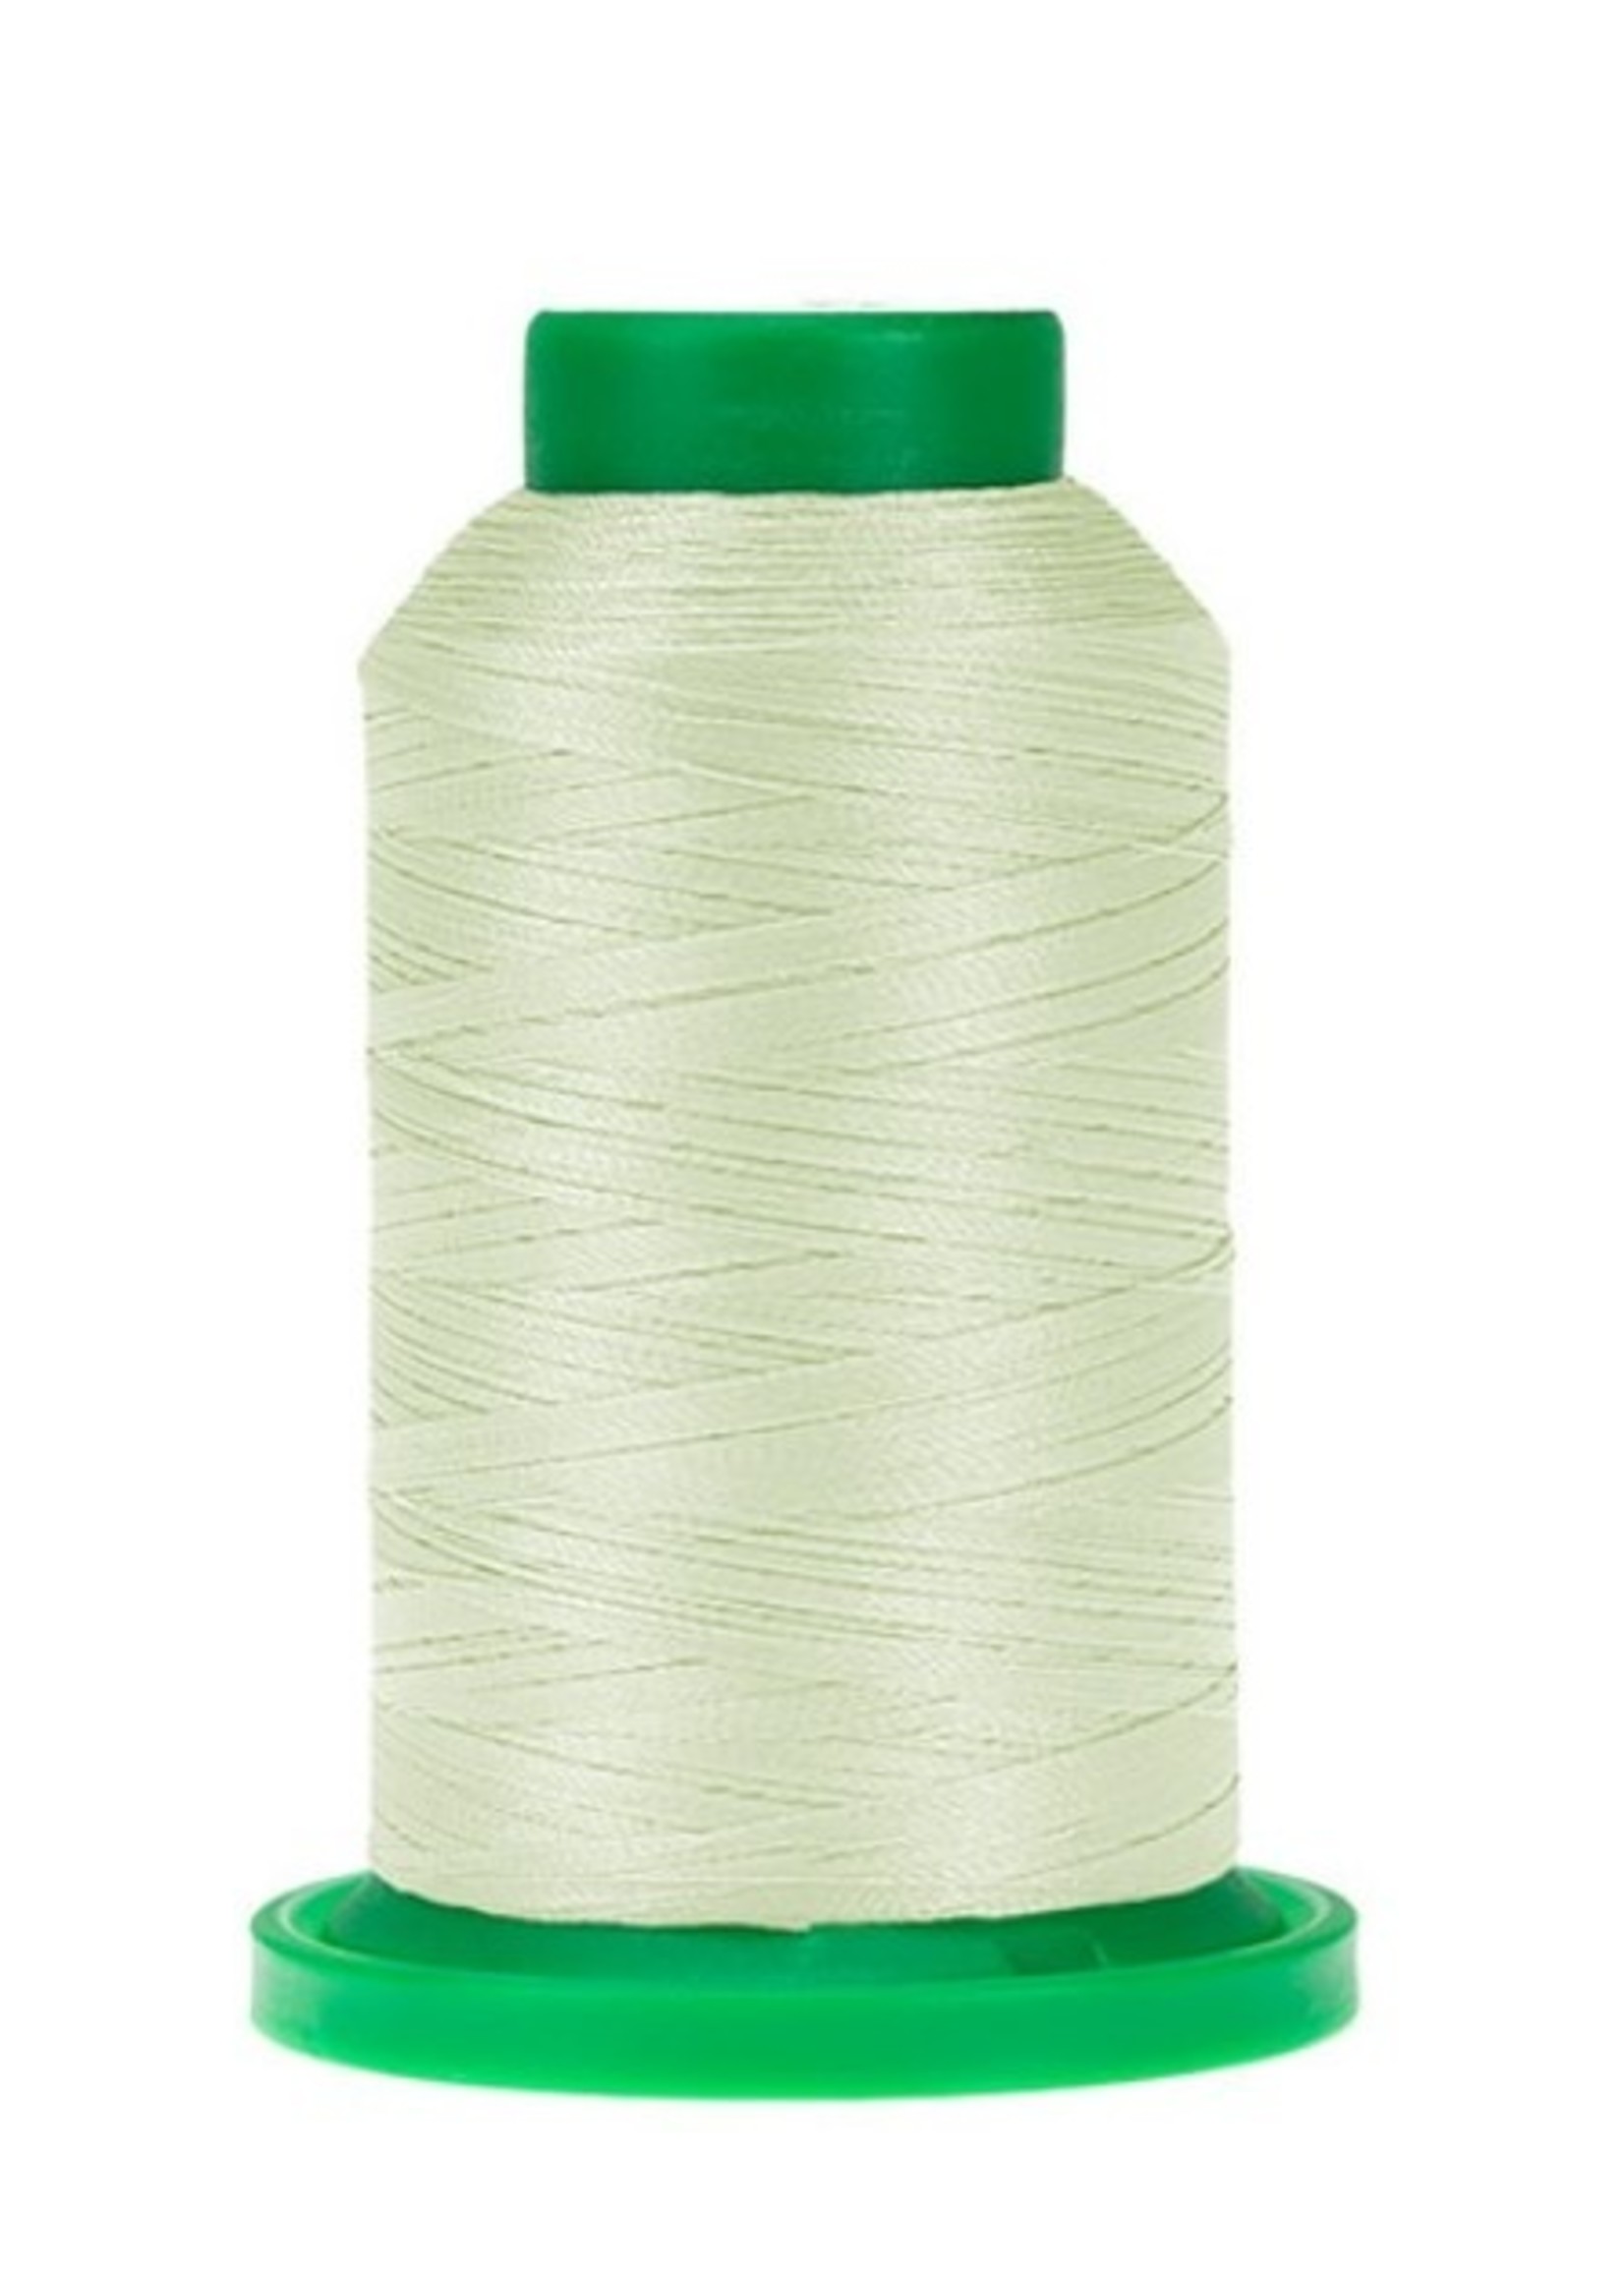 OESD Isacord Embroidery Thread 1000m Polyester - 6071 - Old Lace